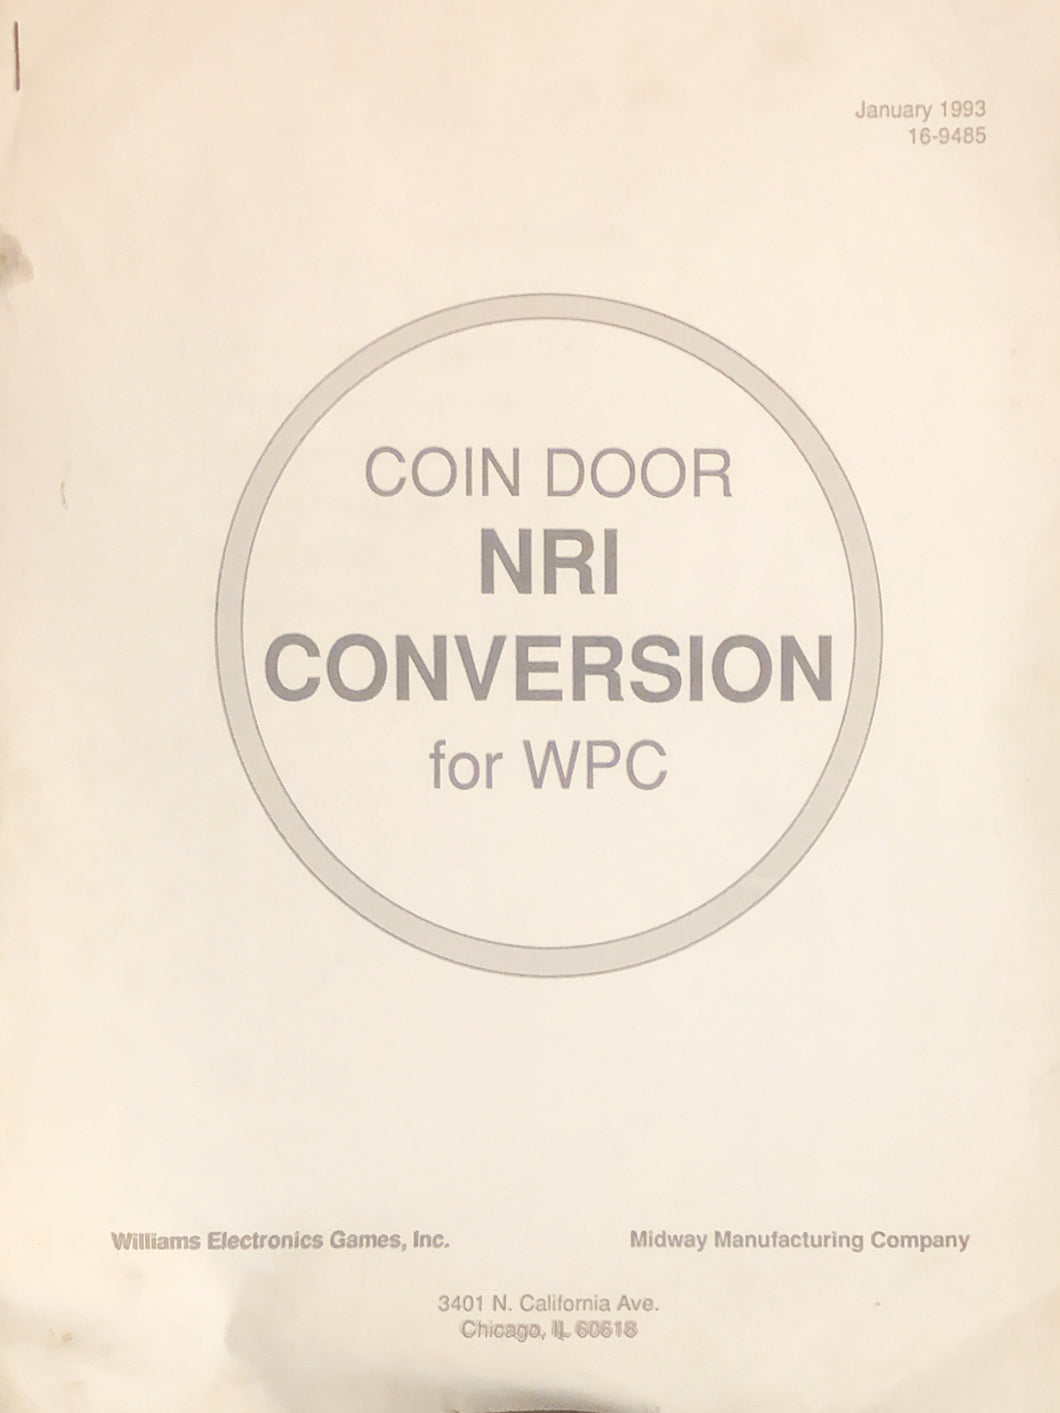 Coin Door NRI Conversion for WPC